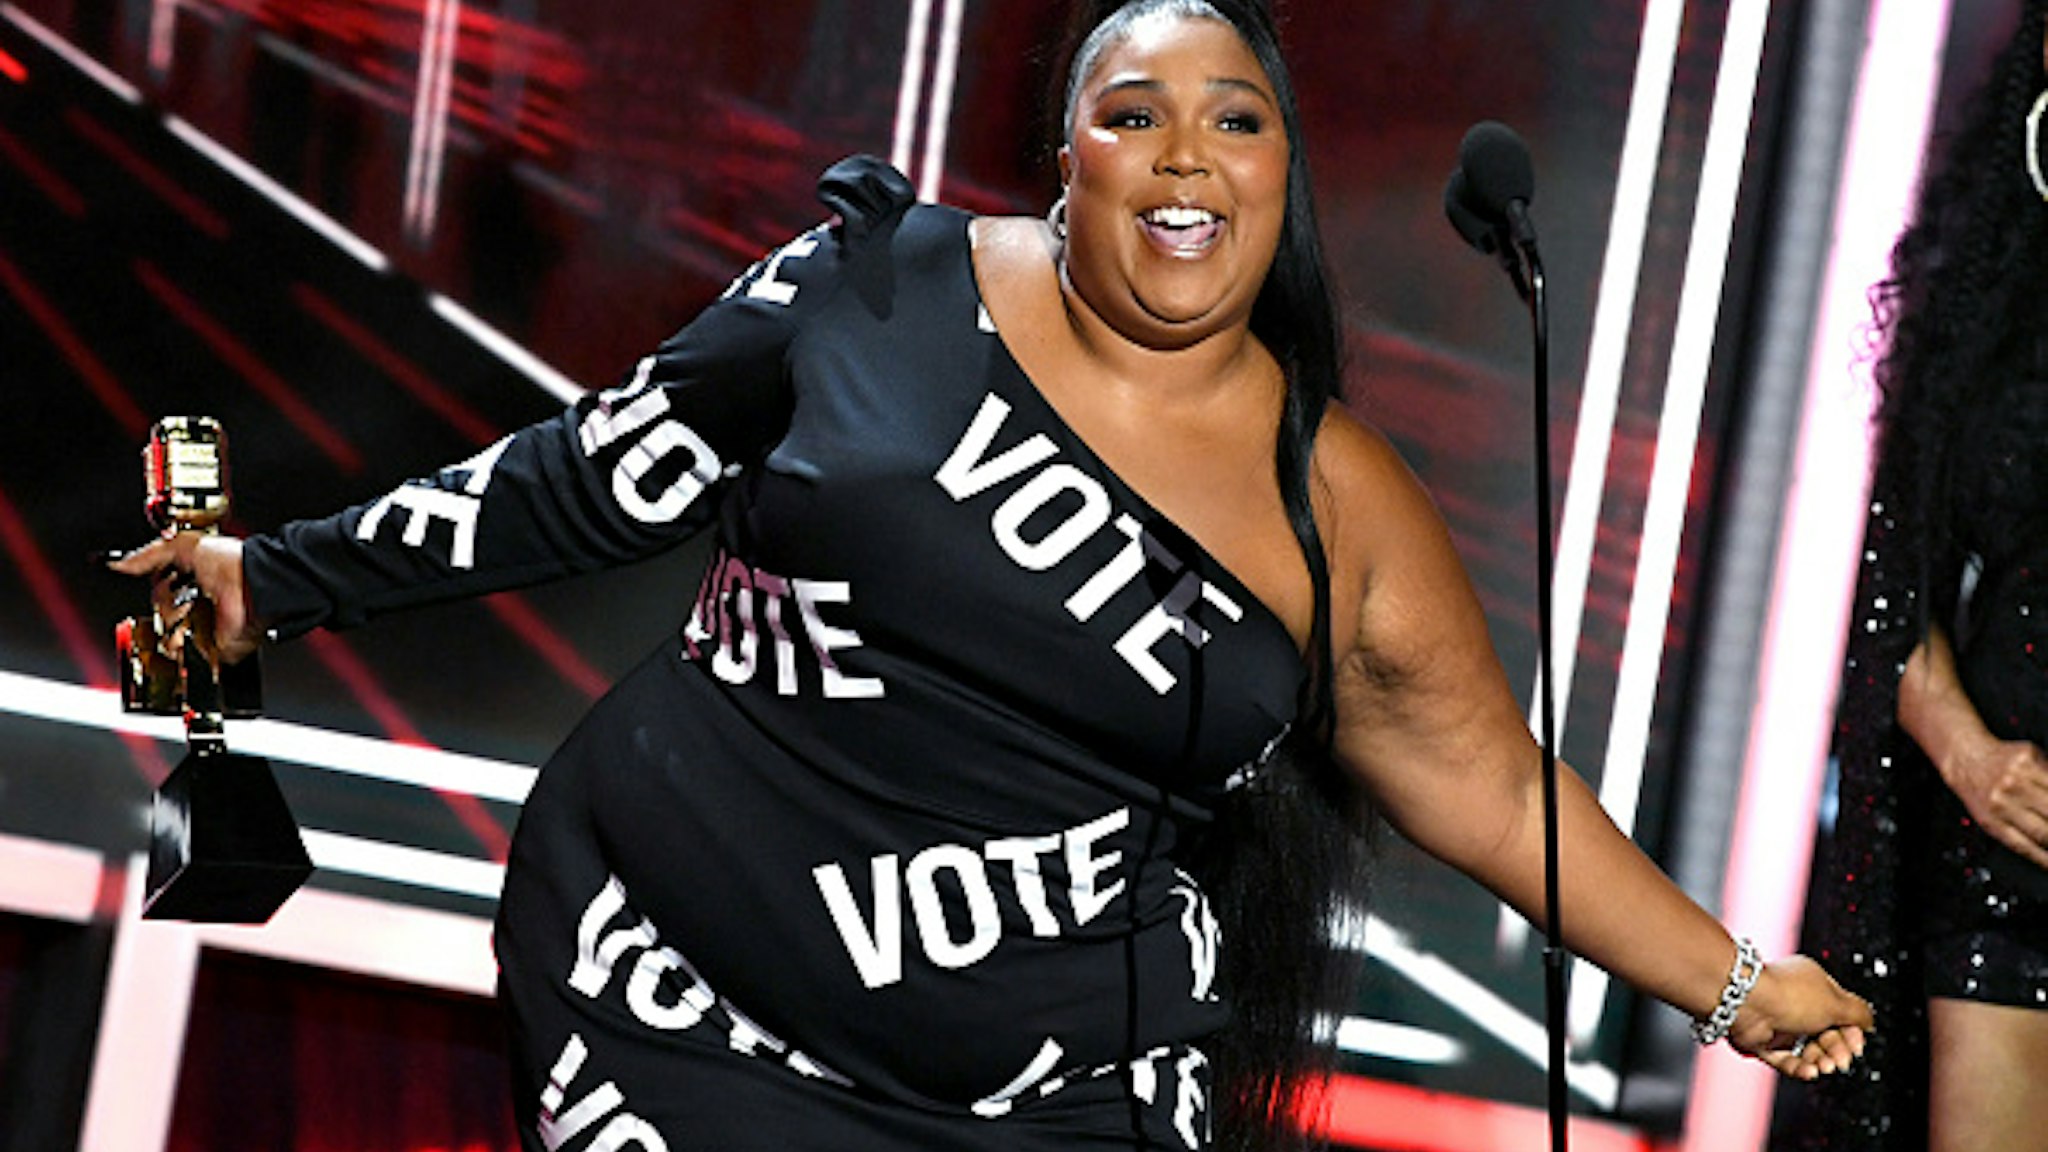 HOLLYWOOD, CALIFORNIA - OCTOBER 14: In this image released on October 14, Lizzo accepts the Top Song Sales Artist Award onstage at the 2020 Billboard Music Awards, broadcast on October 14, 2020 at the Dolby Theatre in Los Angeles, CA.